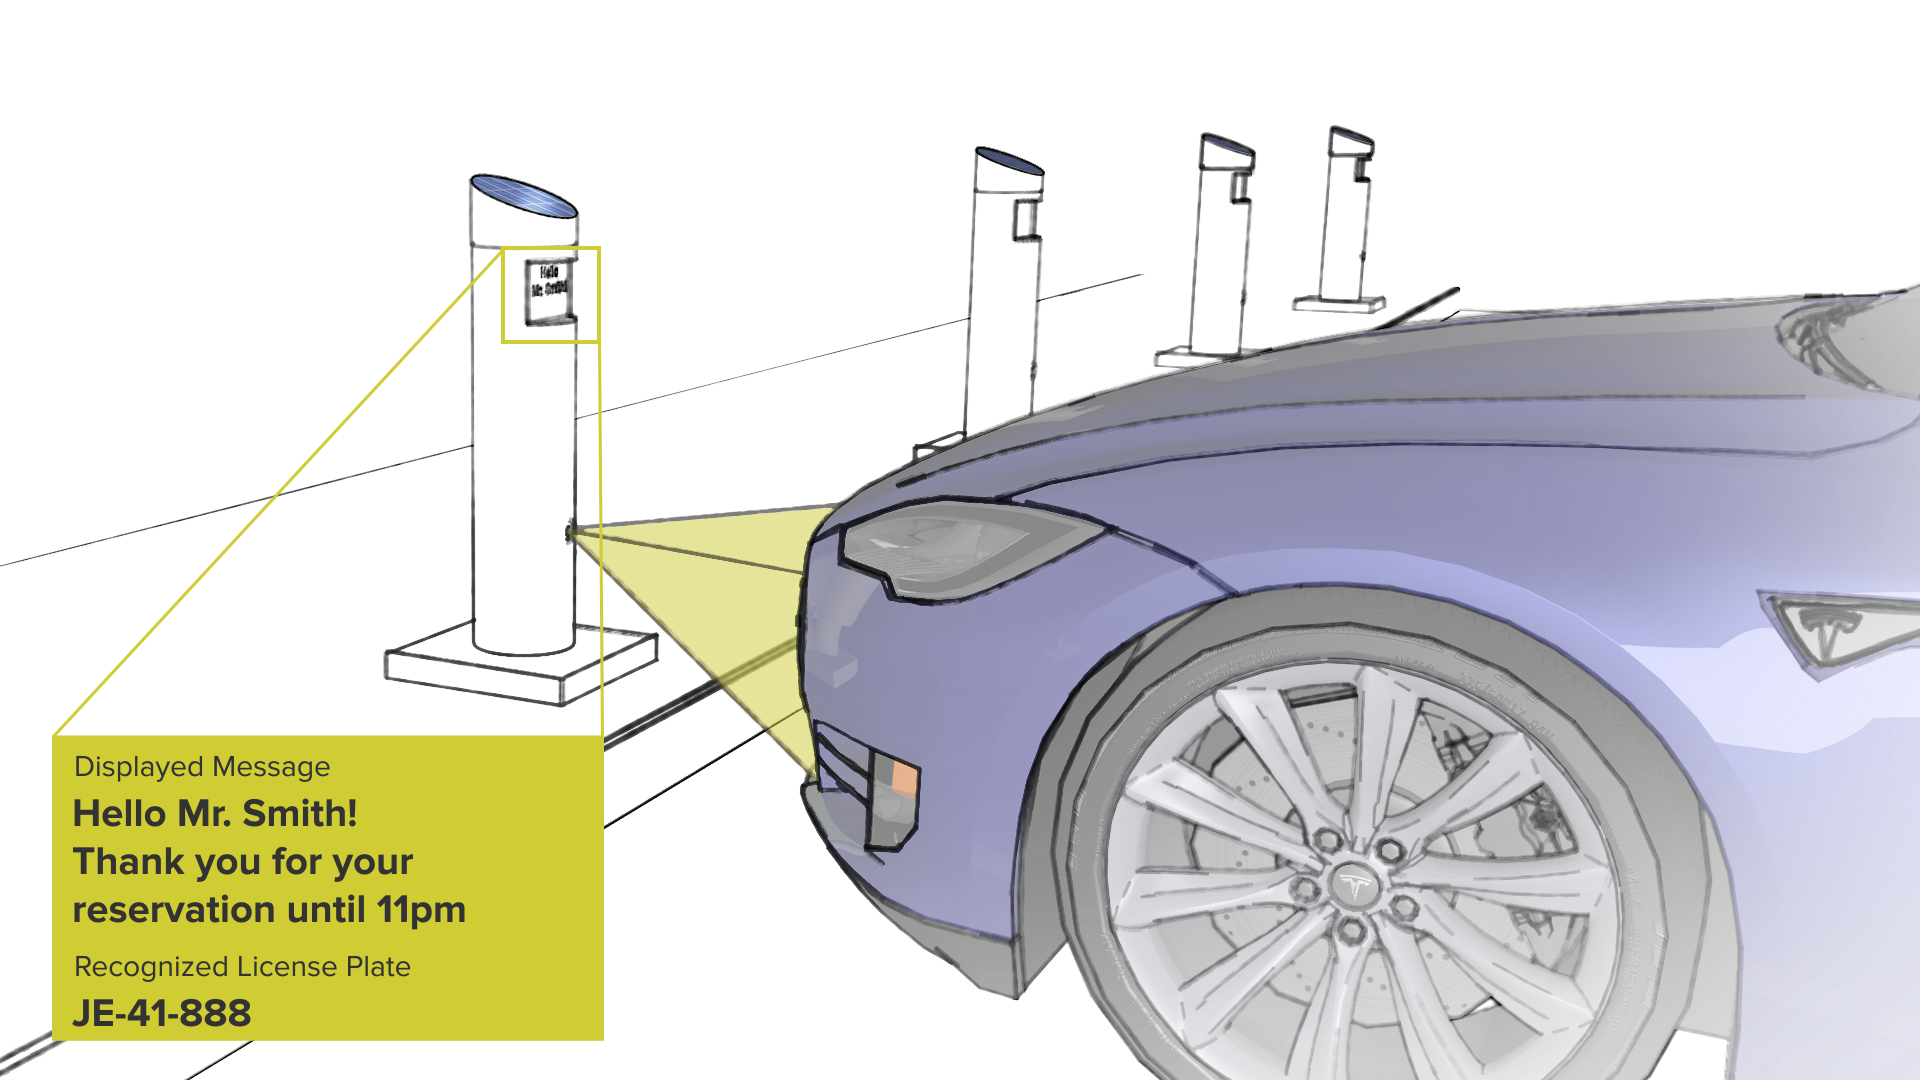 How the Park-Meister Enables Finding, Sharing and Managing of Parking Spaces